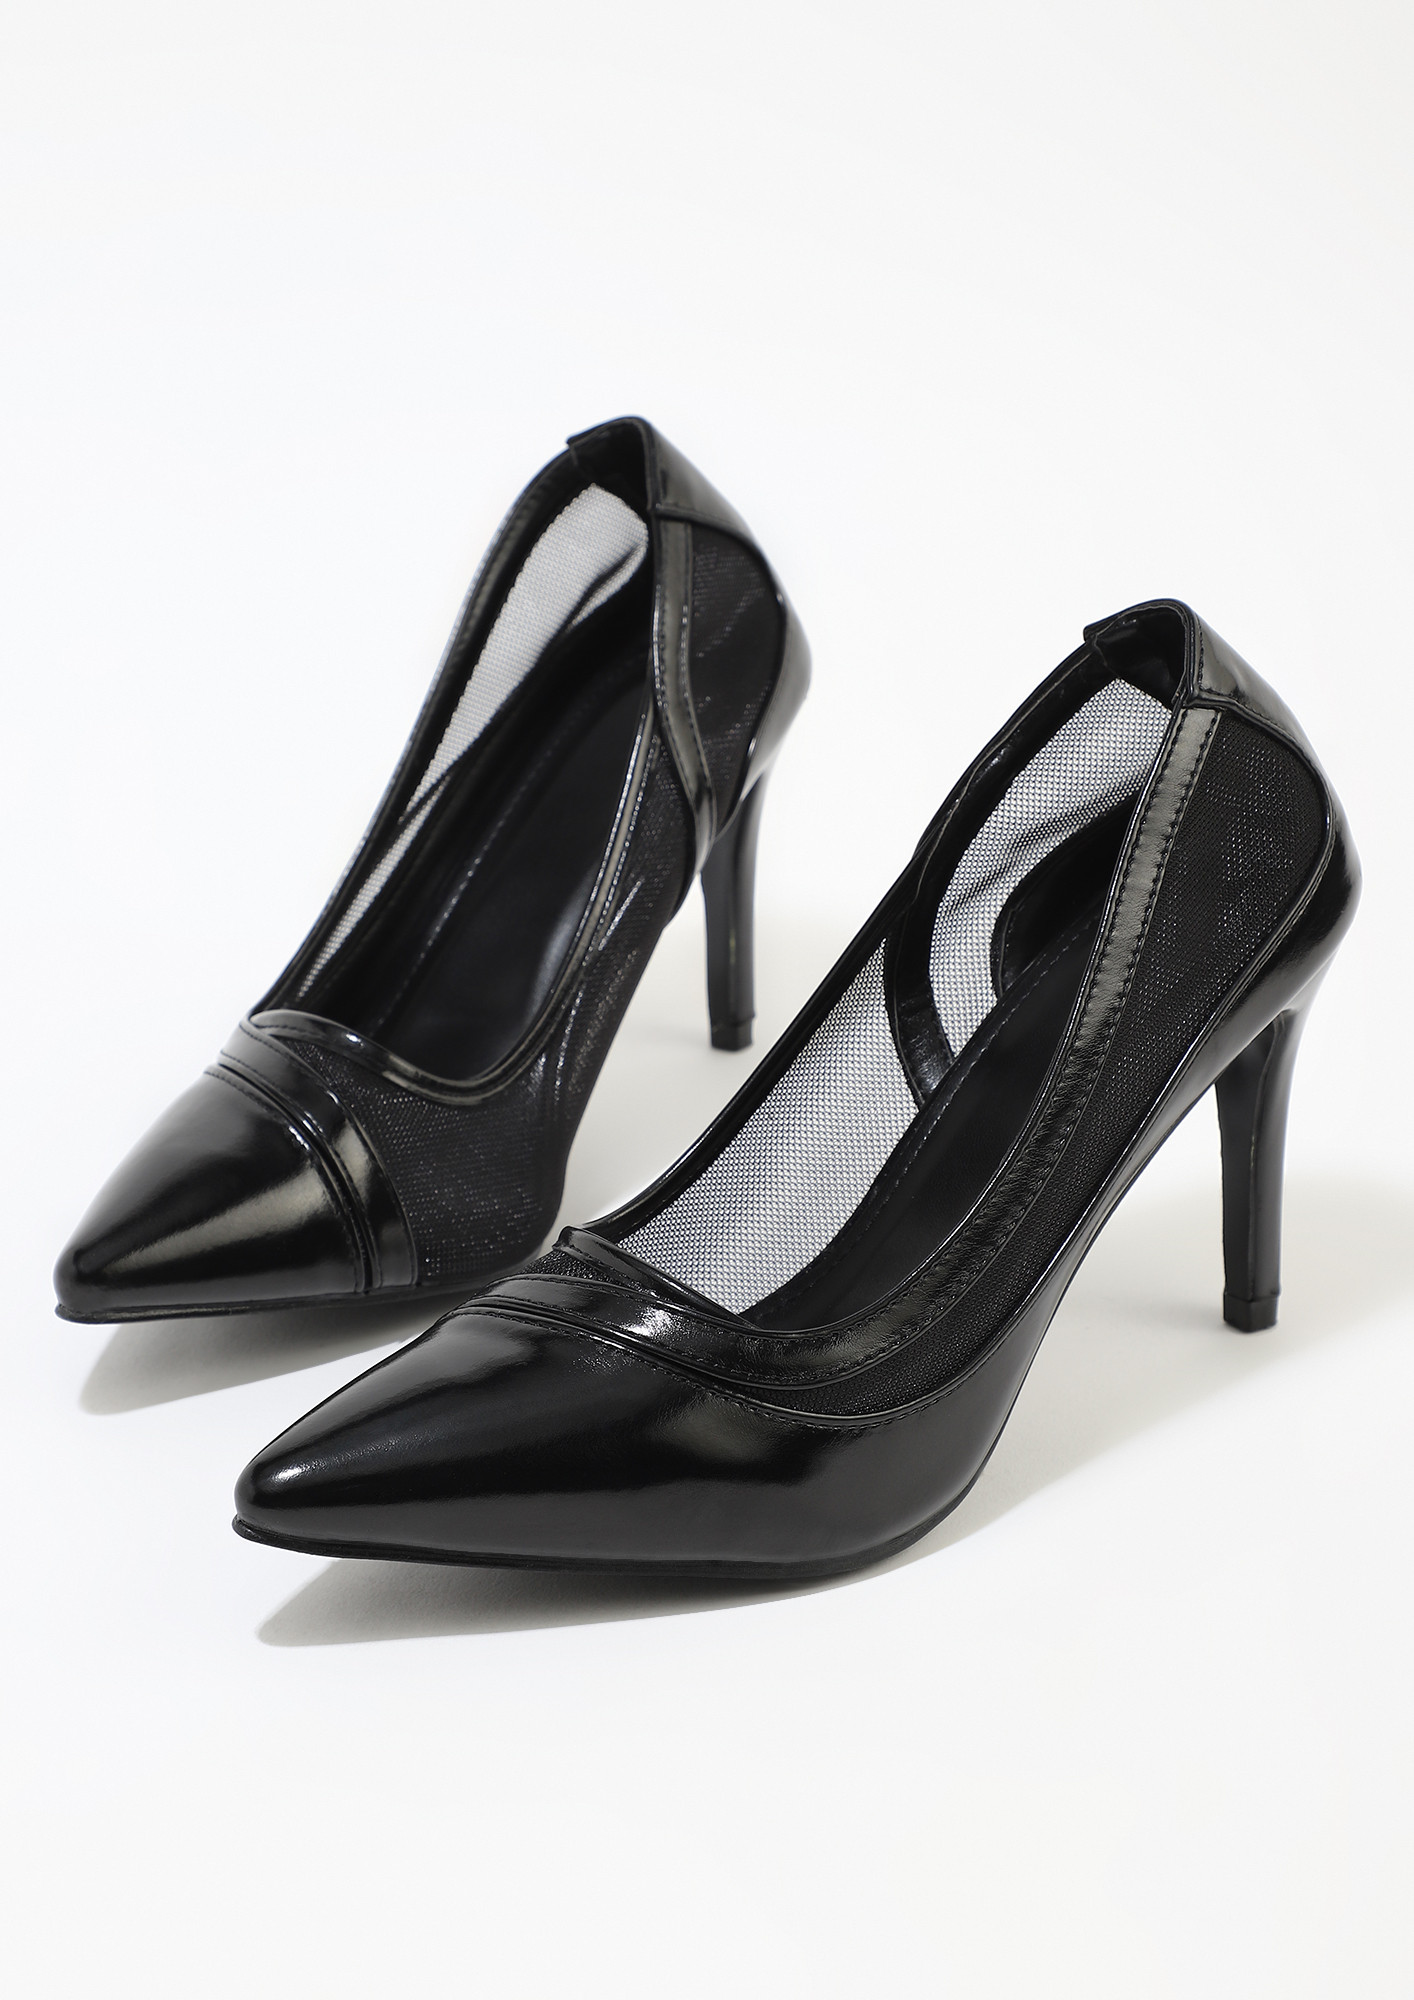 Black High Heels Suede Pointed Toe Rivets Stiletto Heel Ankle Strap Pumps  Women Sexy Shoes - Milanoo.com